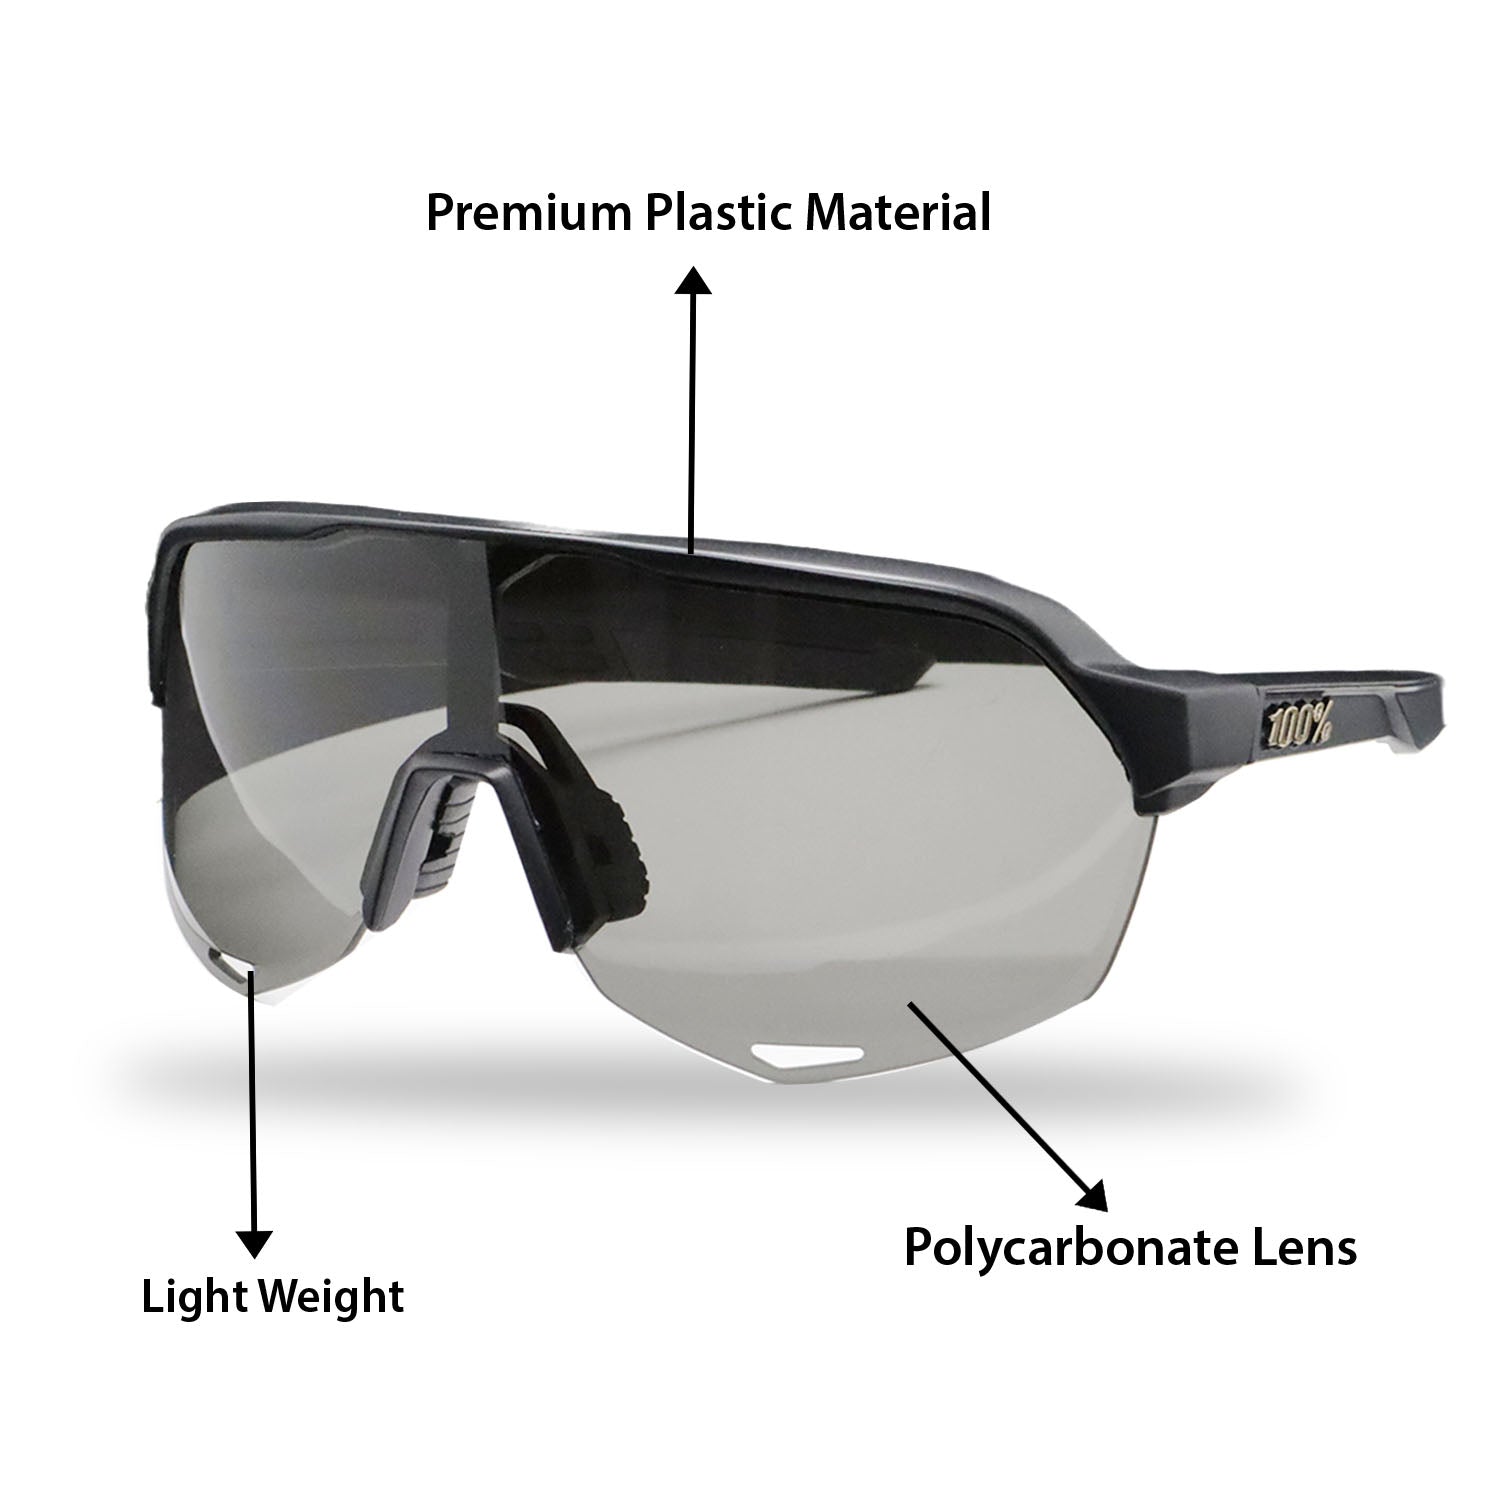 AUTOPOWERZ 100% Sport Performance Sunglasses - Sport and Cycling Eyewear include Extra 2 Lens